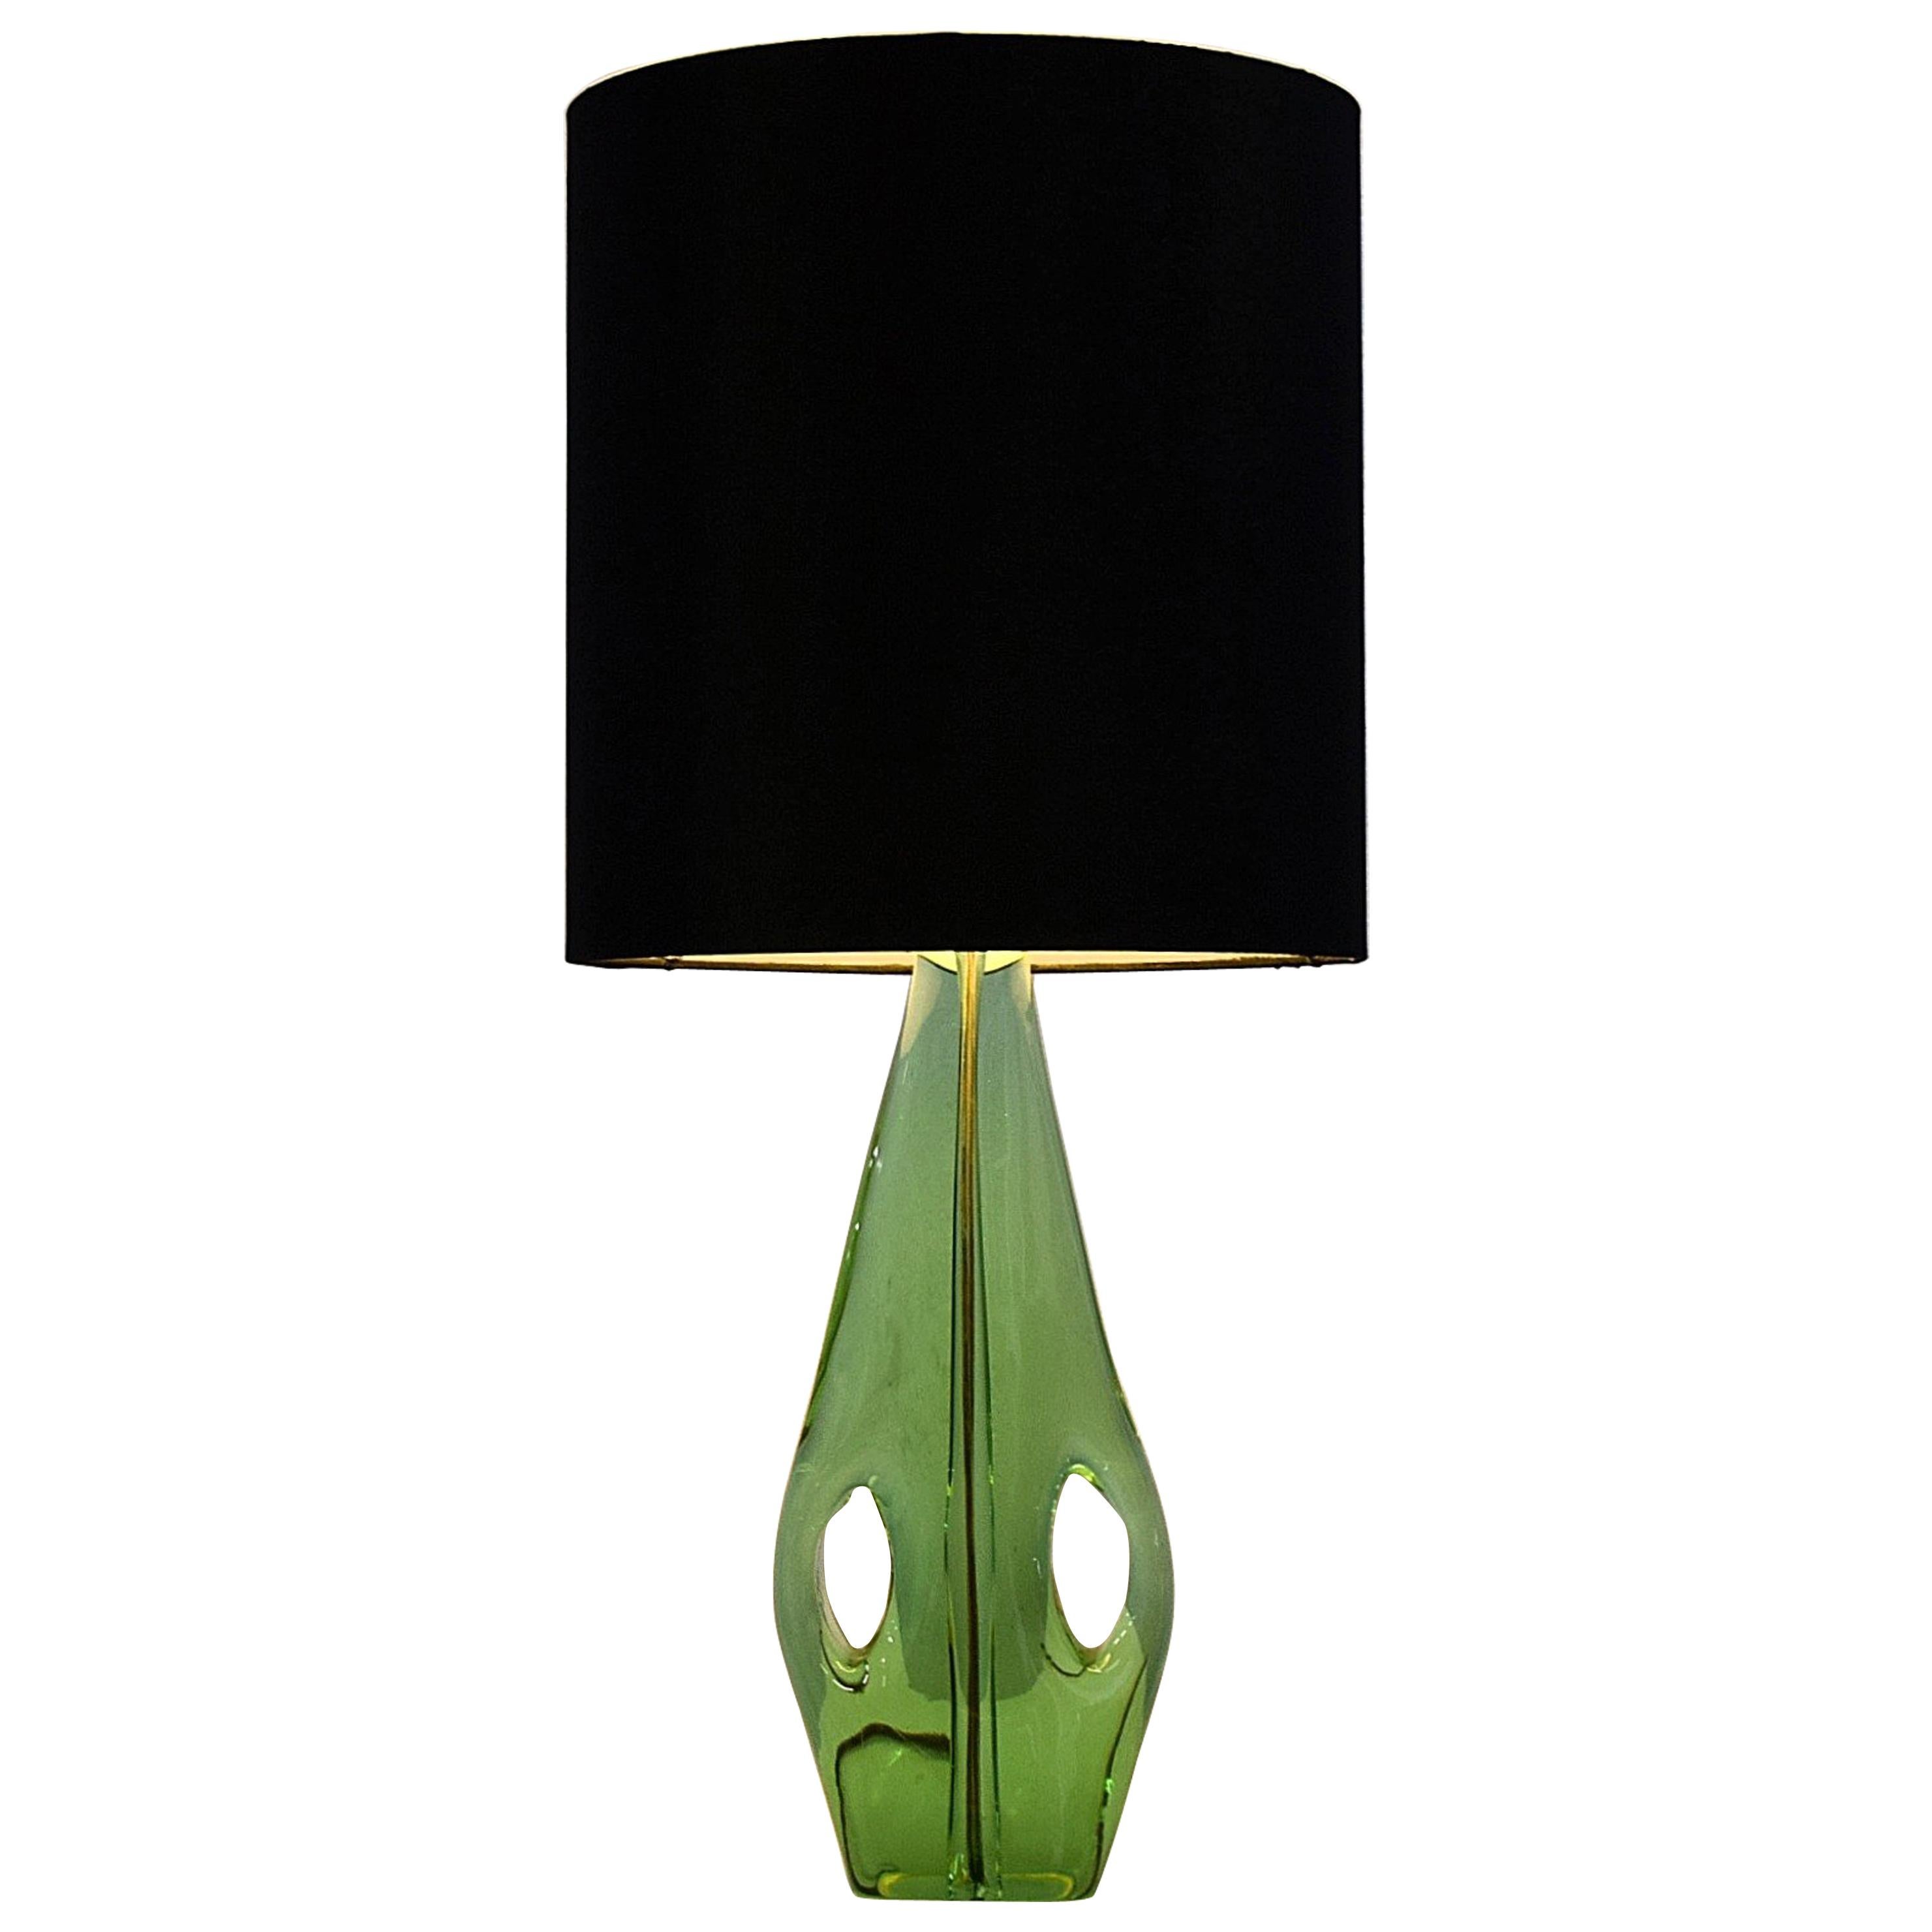 Mid century modern french green glass table lamp